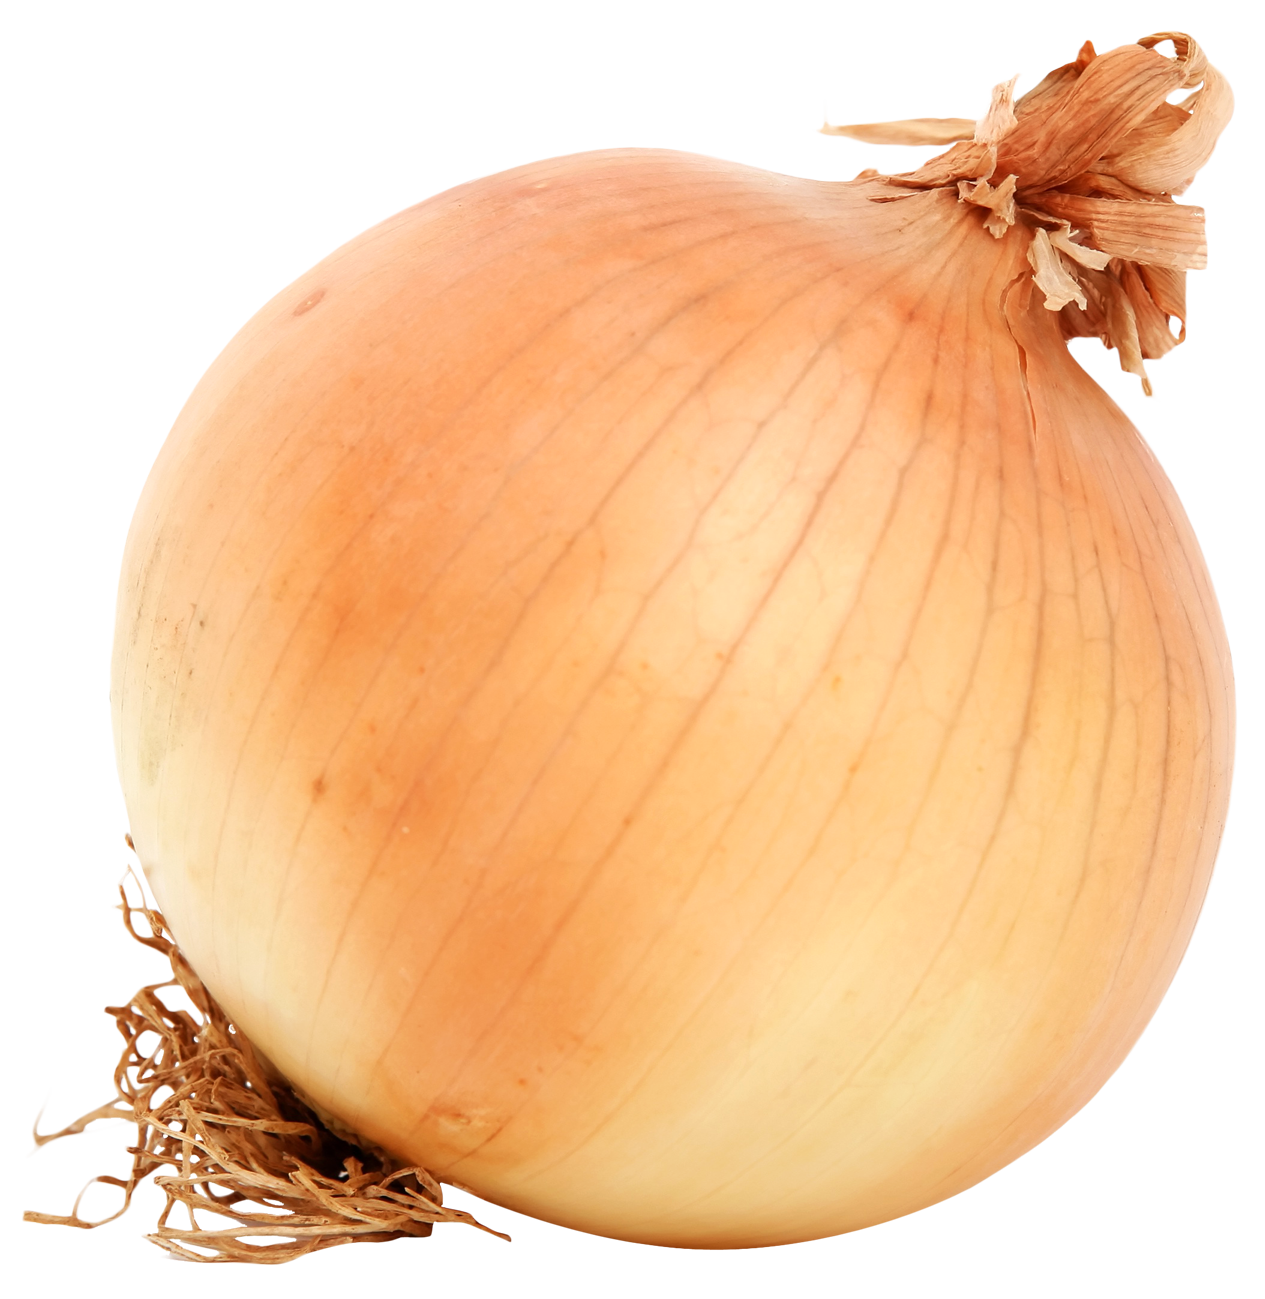 Brown Onion PNG Image